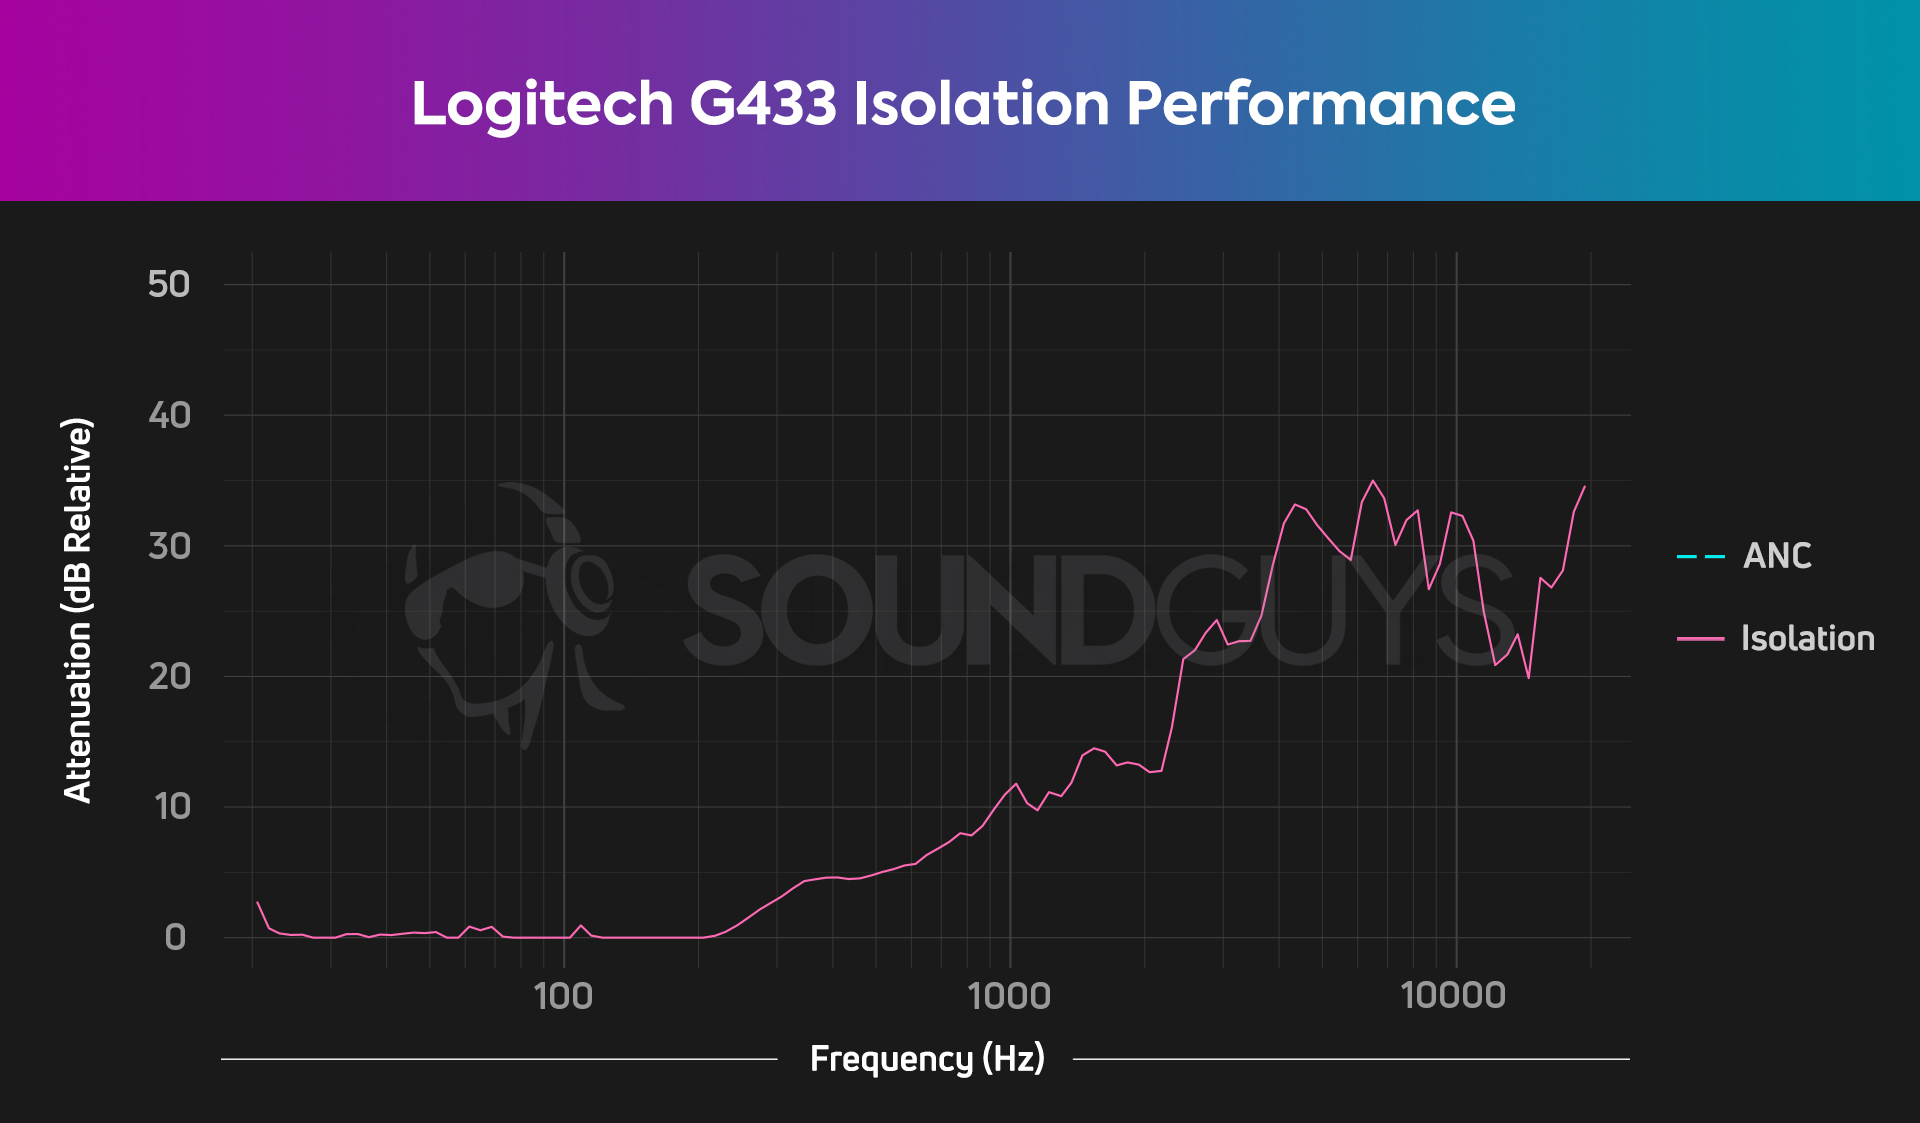 The Logitech G433 isolation chart, showing no attenuation in the low end and only some attenuation in the mids and highs.